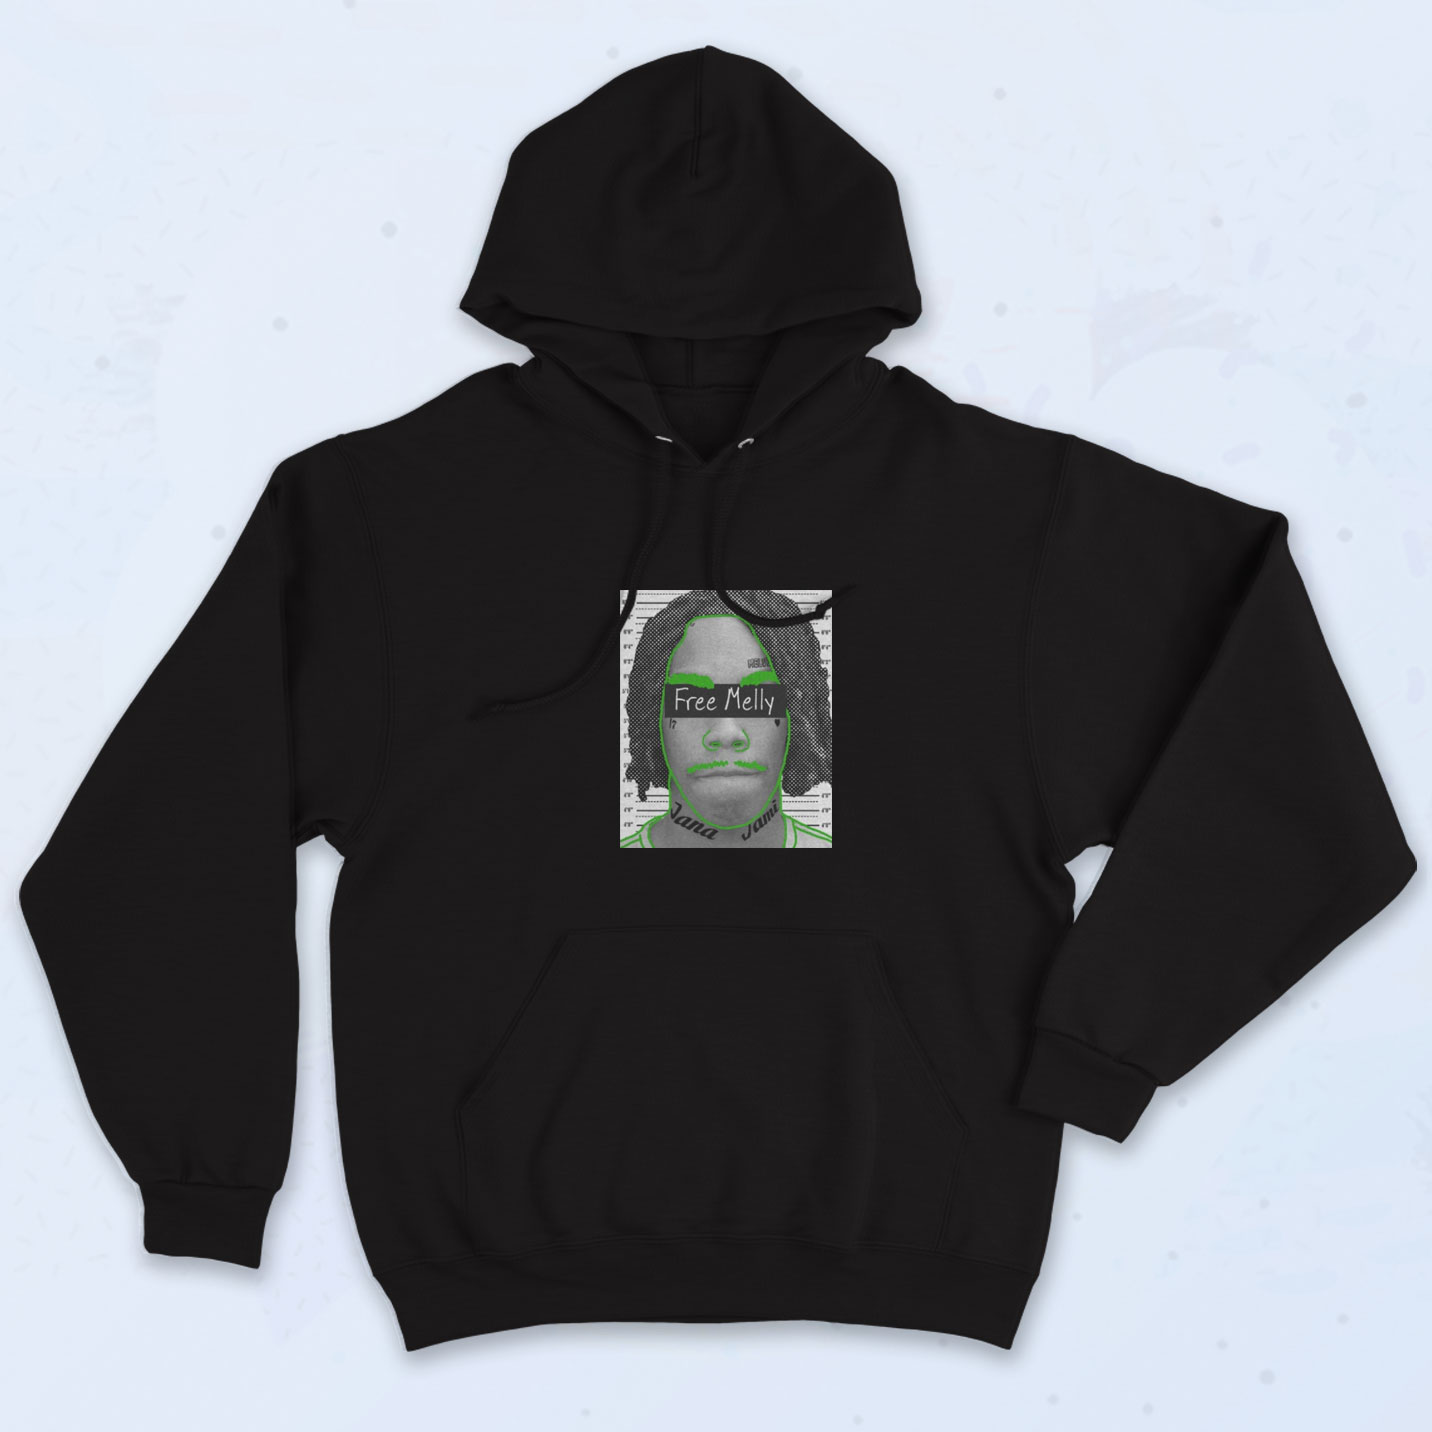 Ynw Melly Free Melly Hoodie On Sale - 90sclothes.com